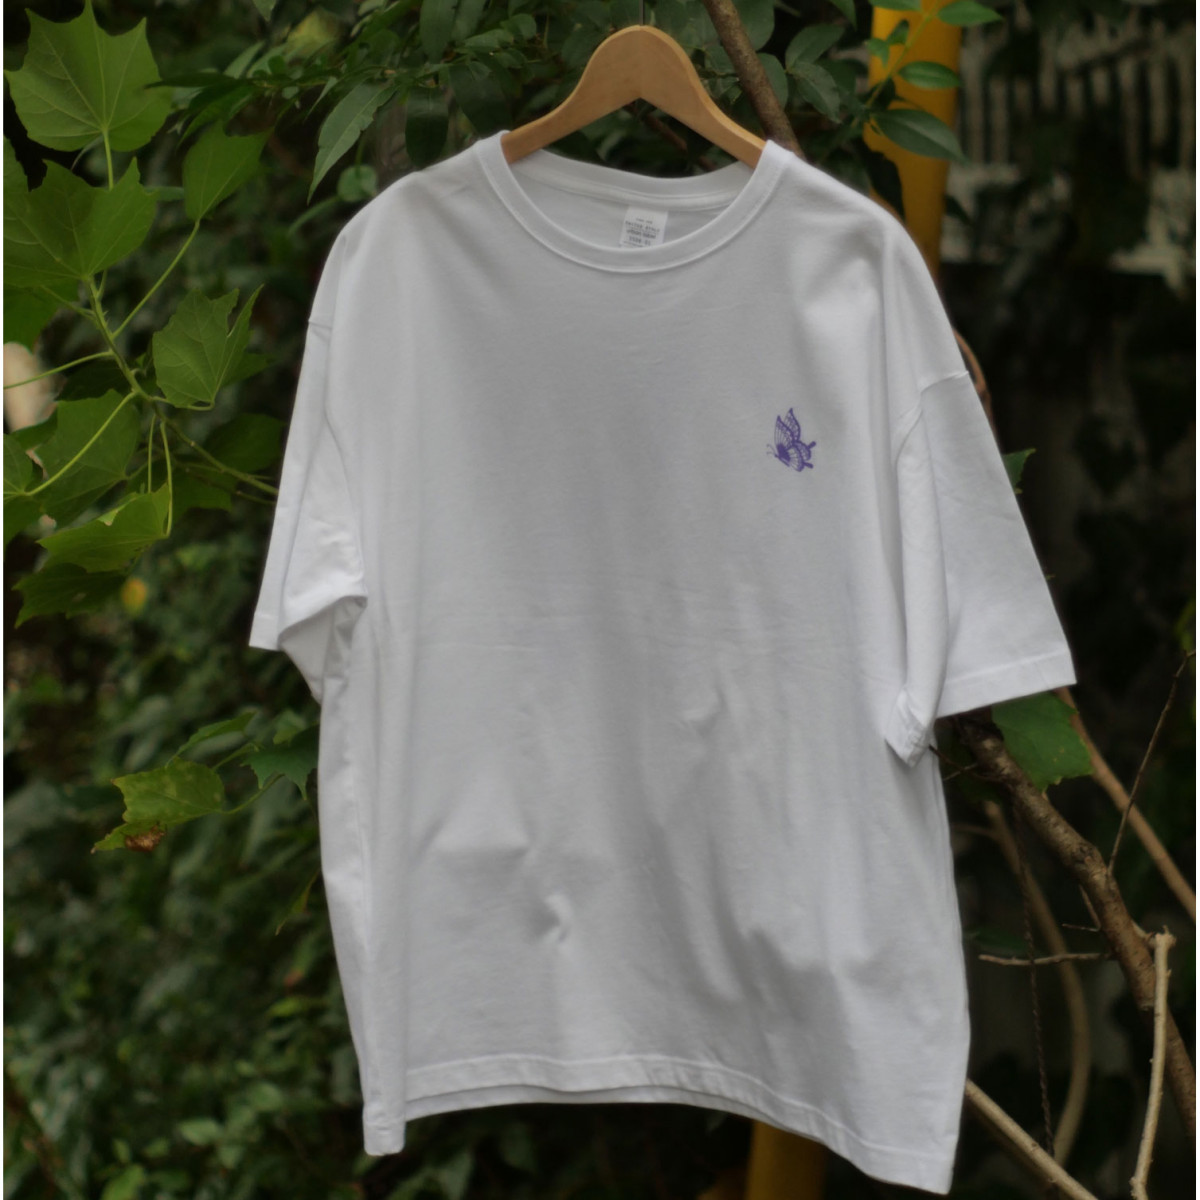 「FLY FLY FLY」 Big T-shirt / White